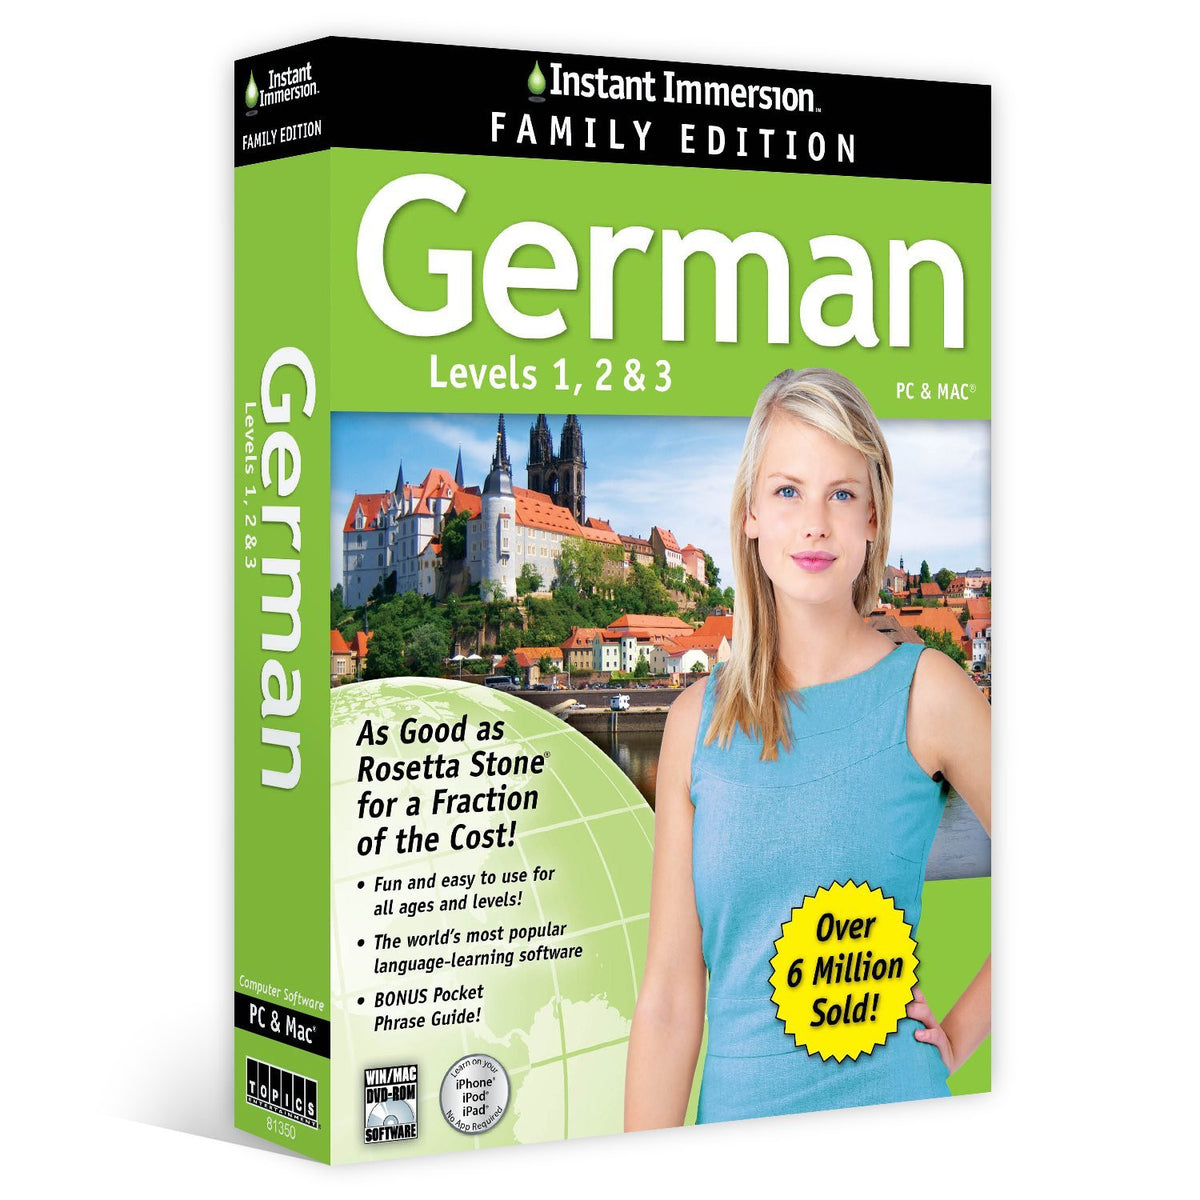 Instant Immersion German Family Edition Levels 1,2,3 PC & MAC